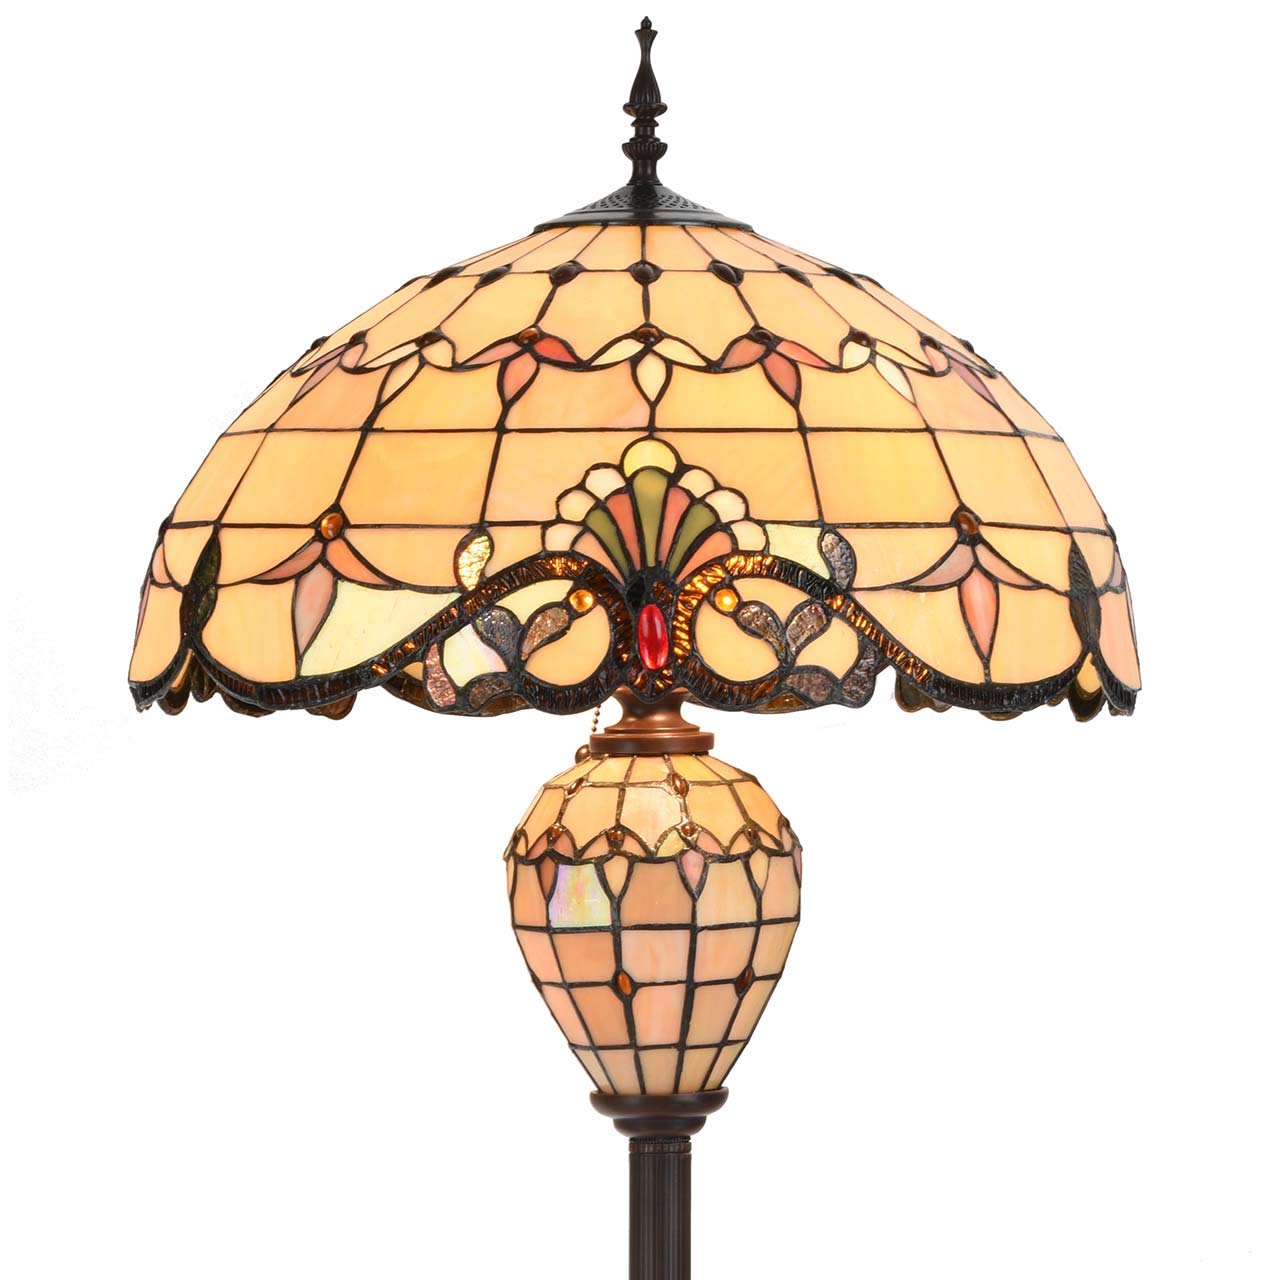 Bieye L10803 Baroque Tiffany Style Stained Glass Floor Lamp Lighted Base 20 inches Wide Lampshade 64 inches Tall, Cream